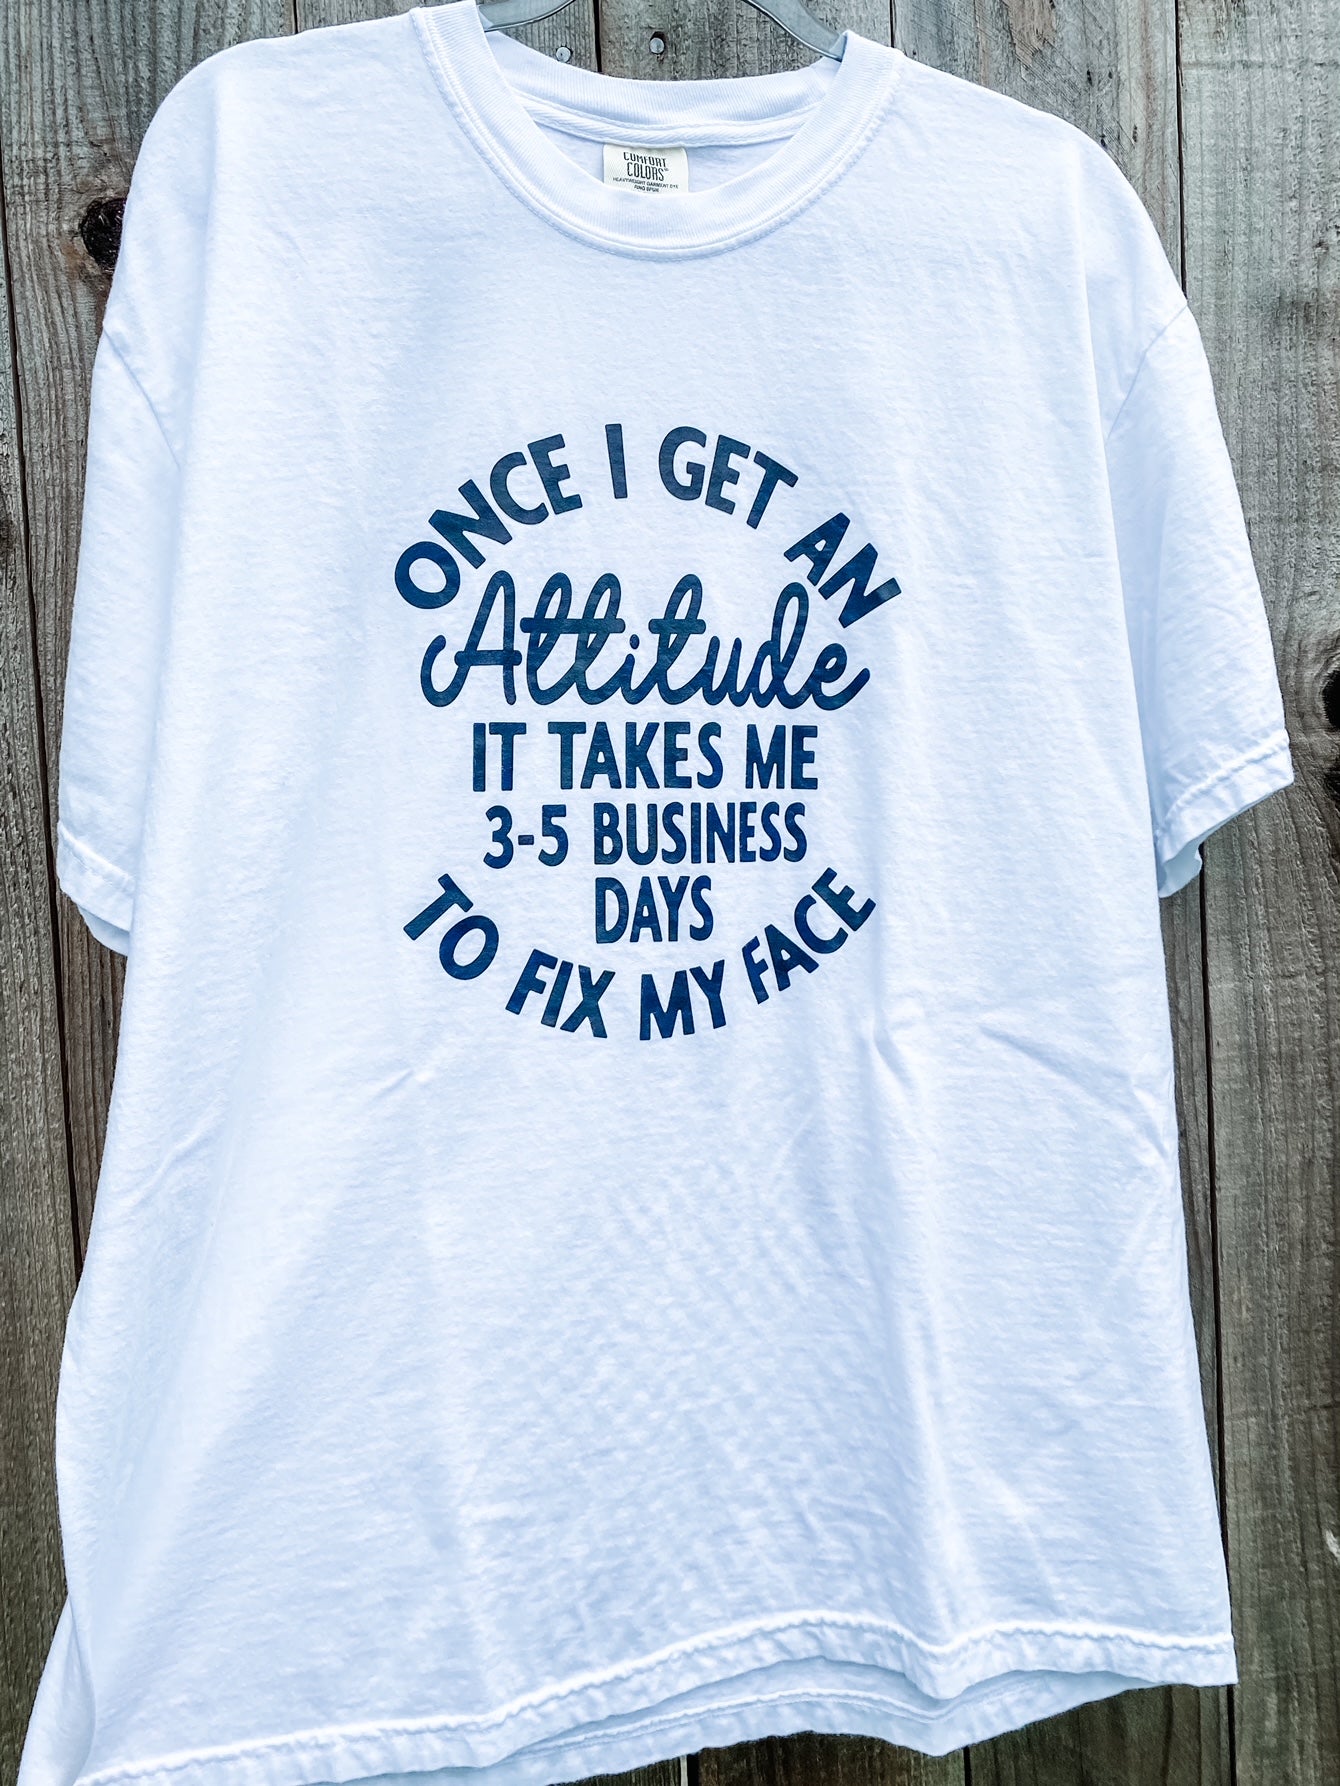 Once I Get An Attitude...White X-Large T-Shirt